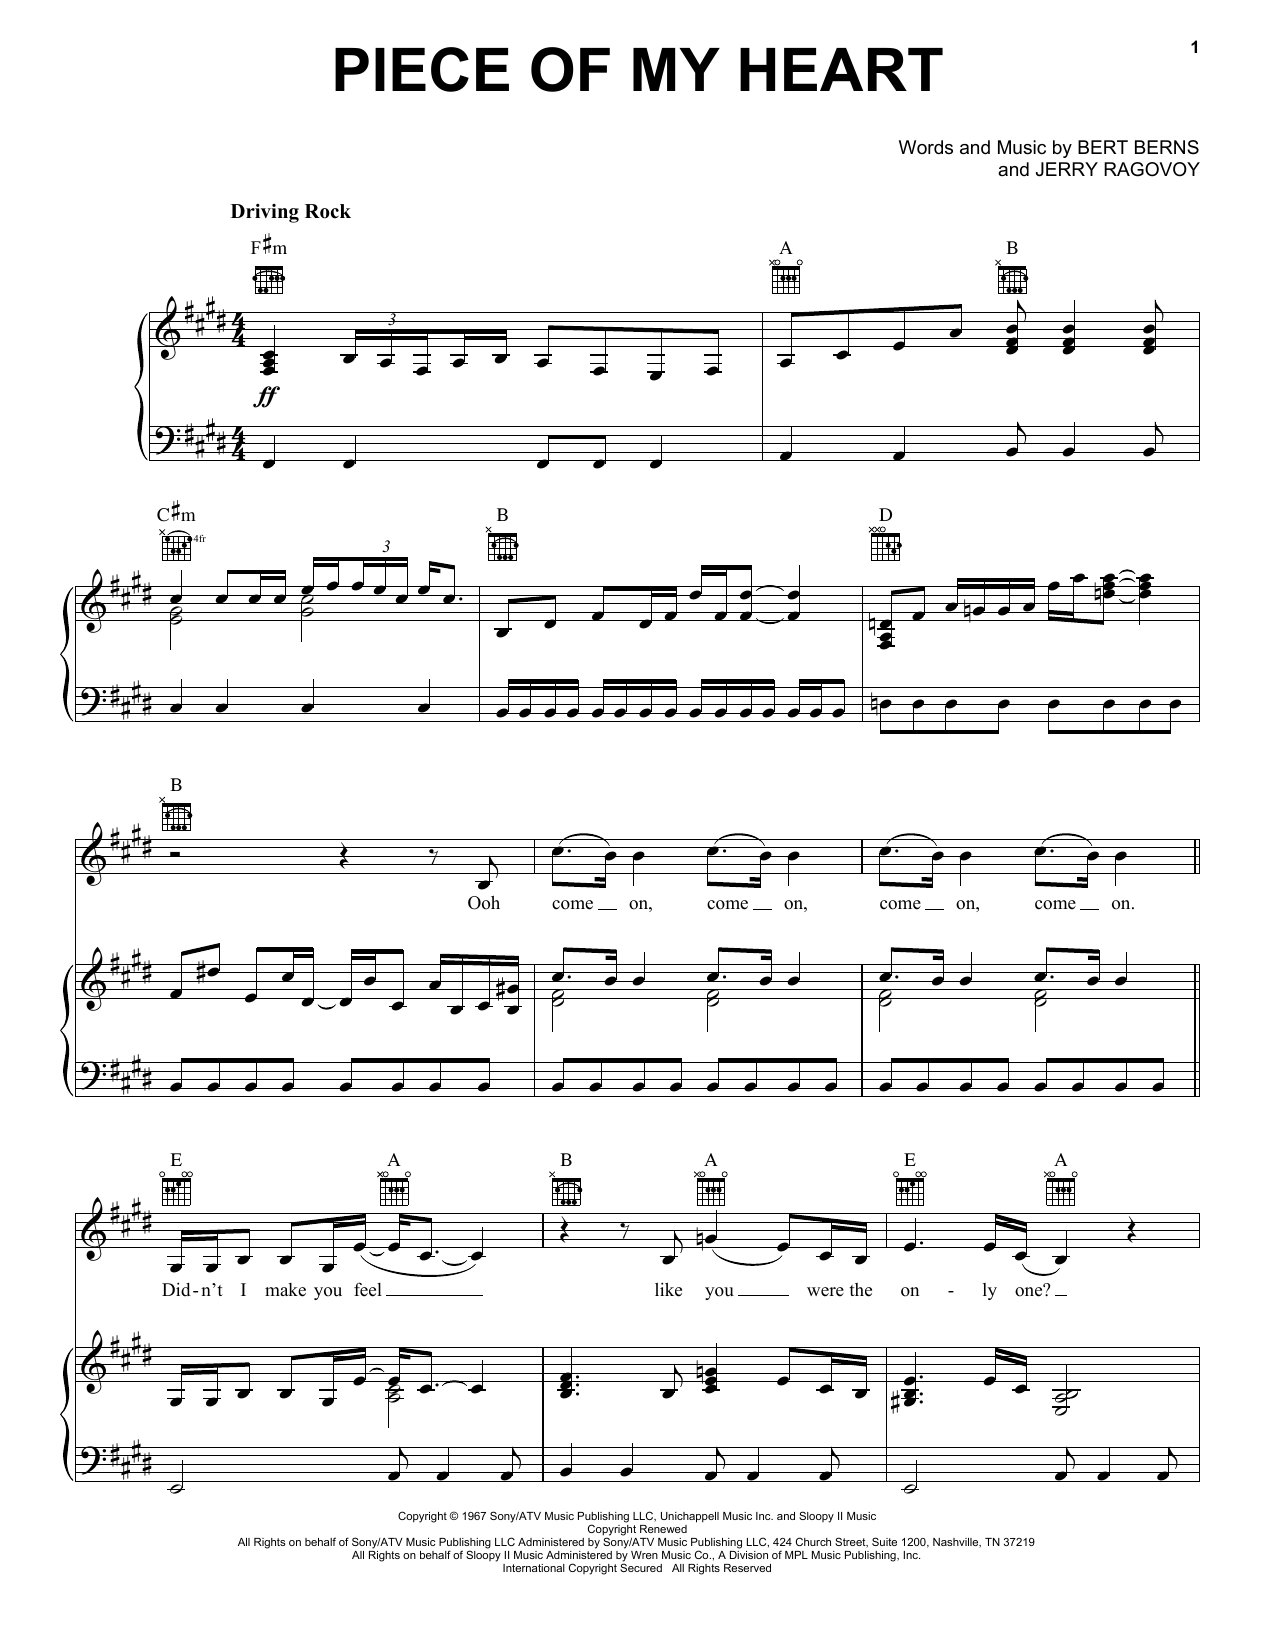 Melissa Etheridge 'Piece Of My Heart' Sheet Music & Chords  Printable  Piano, Vocal & Guitar PDF Notes 